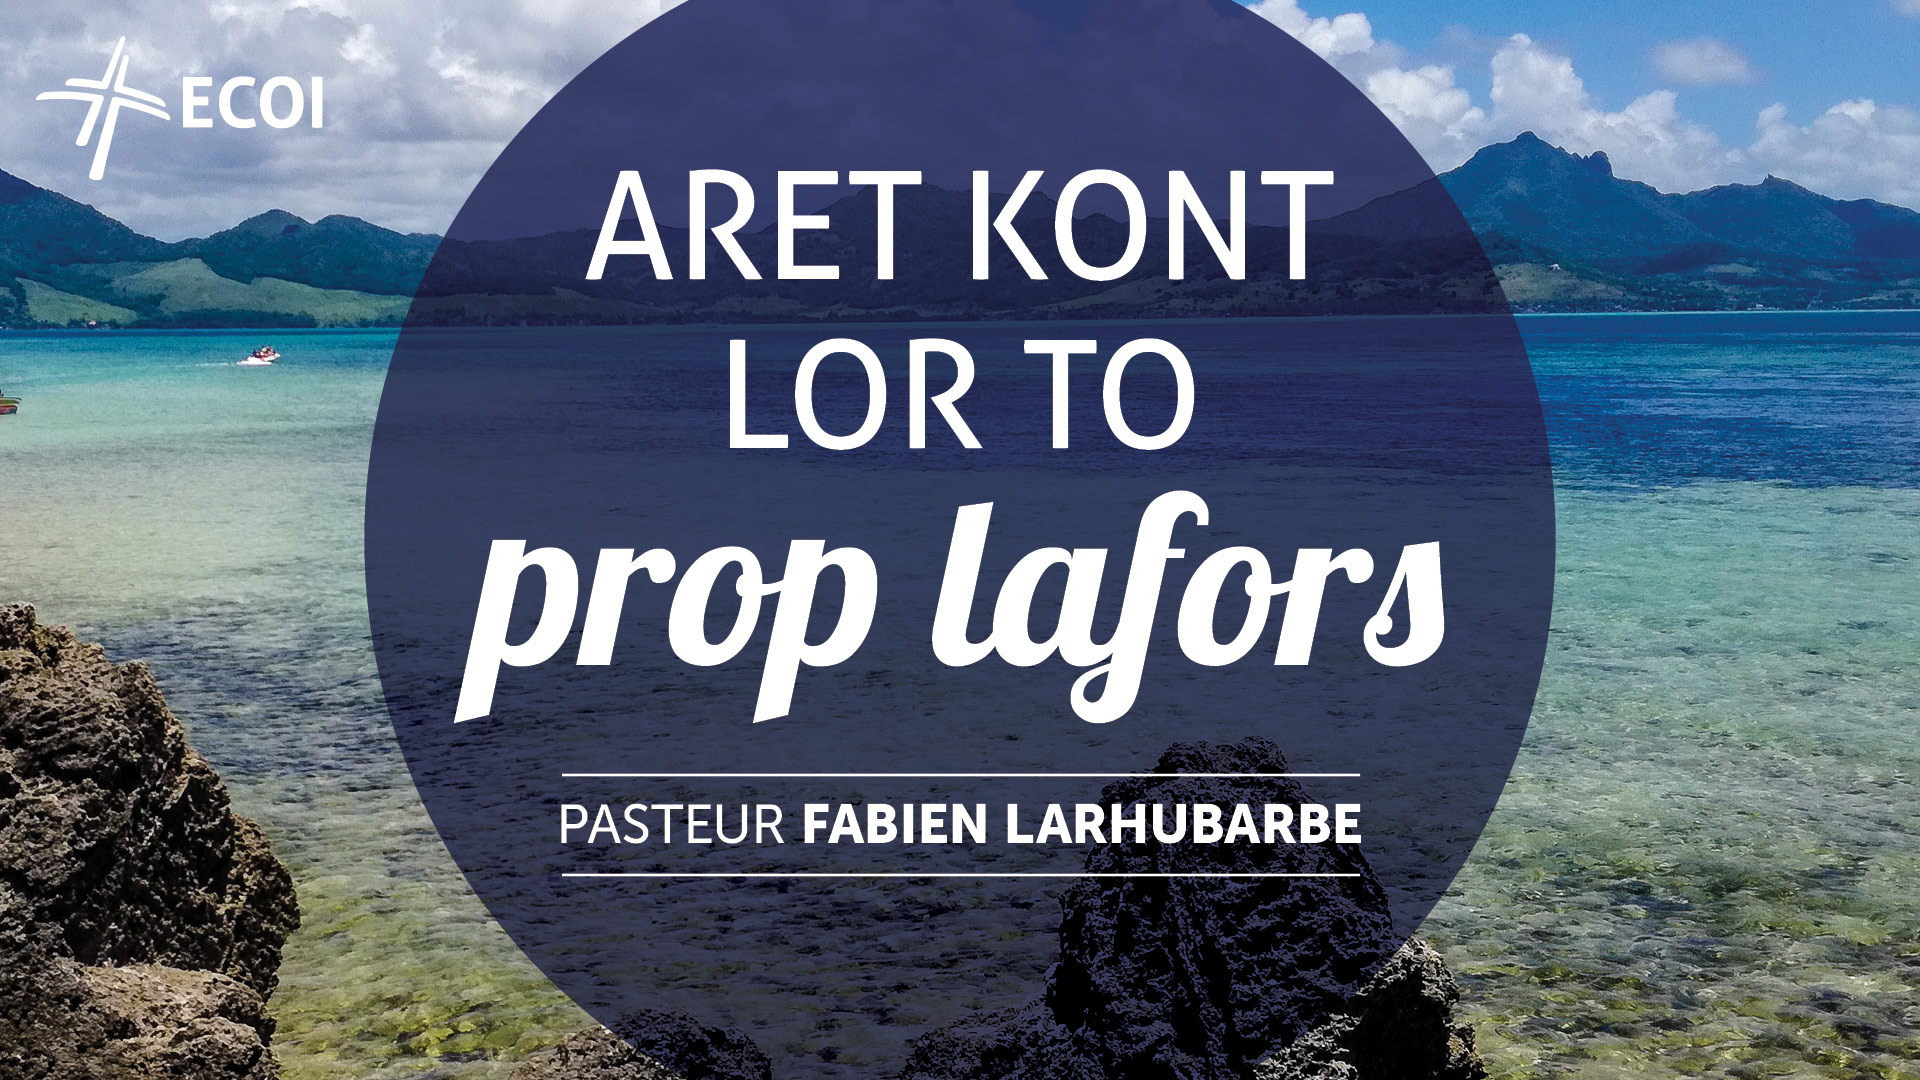 Featured image for “Aret kont lor to prop lafors”